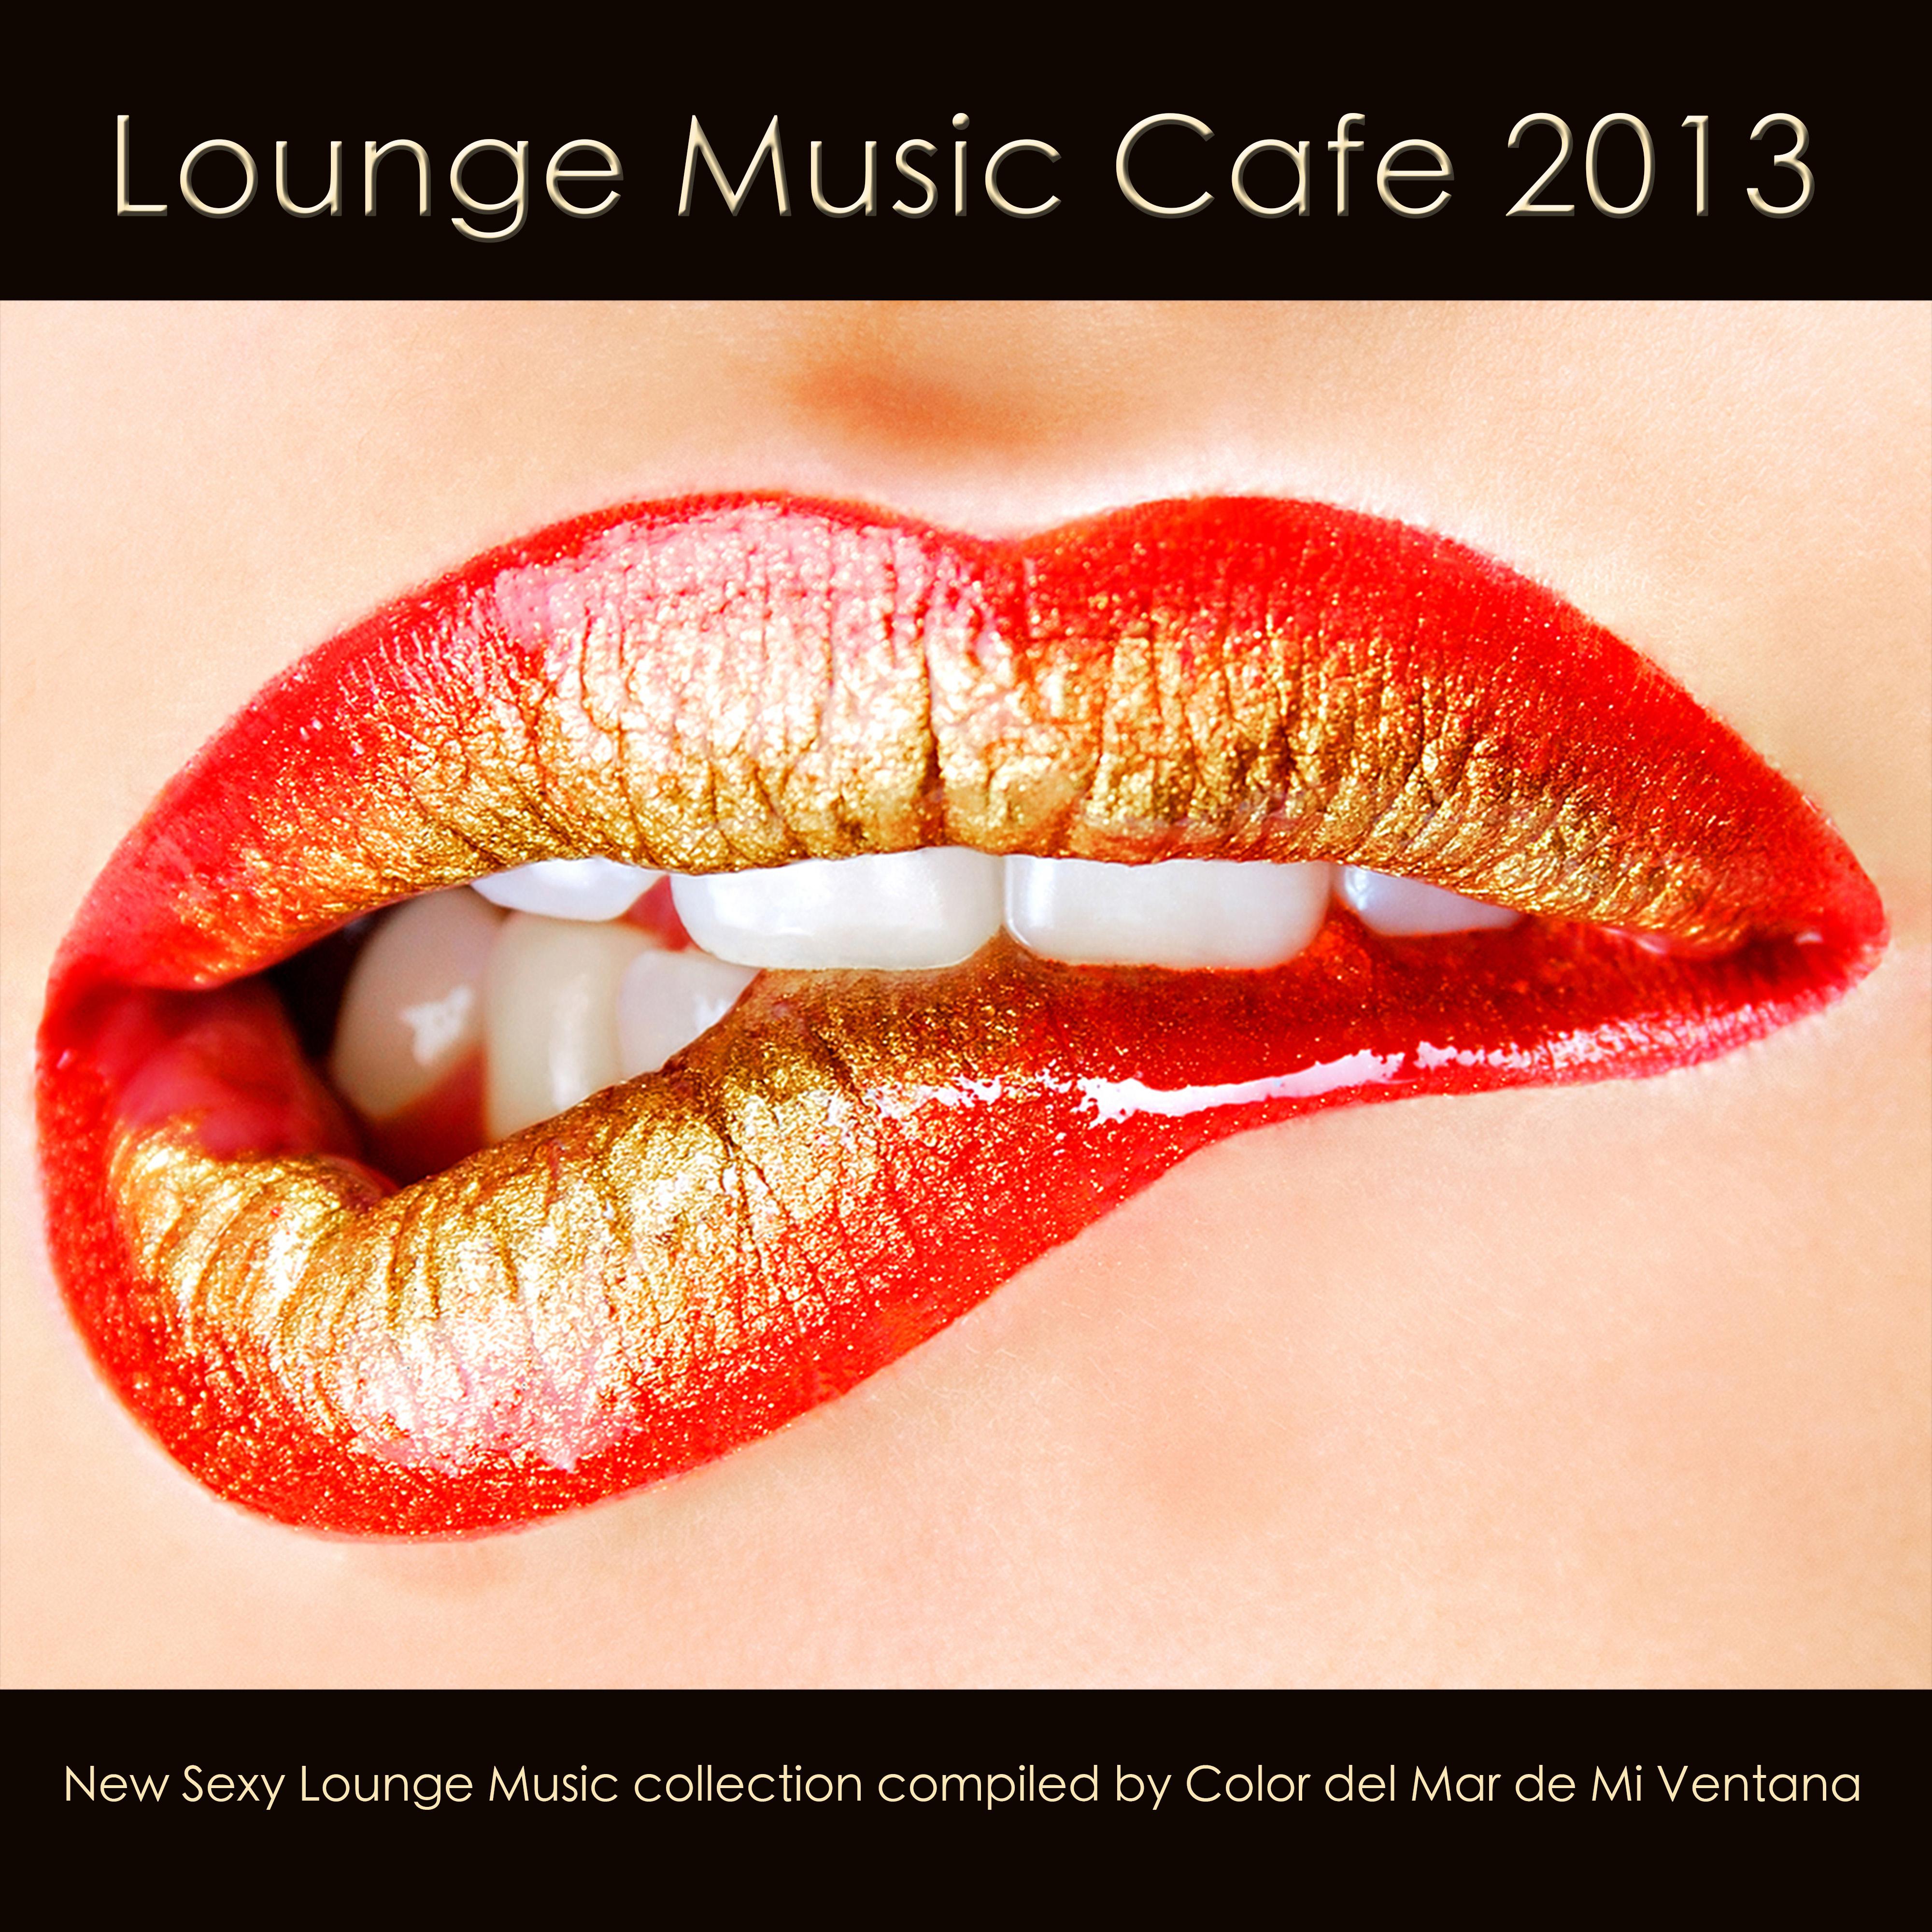 Lounge Music Cafe 2013 (New **** Lounge Music Collection Compiled By Color Del Mar De Mi Ventana)